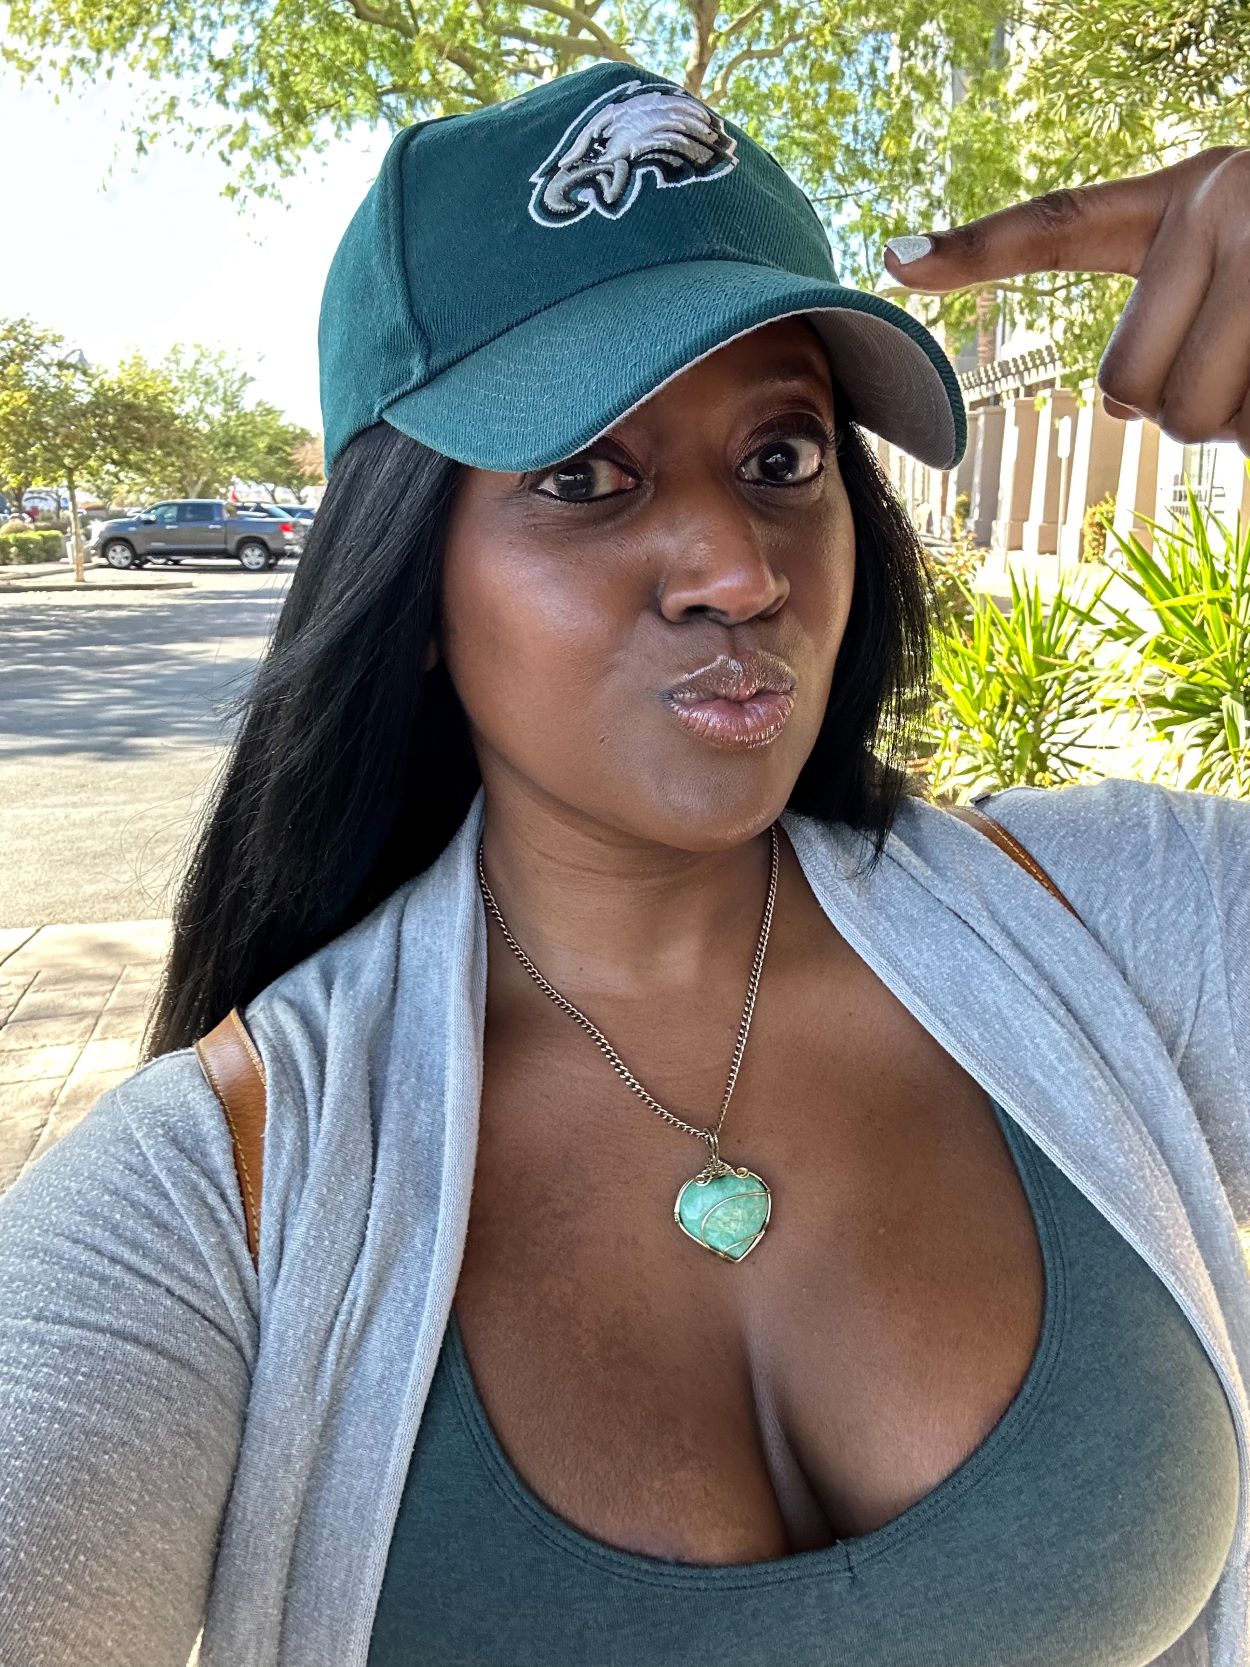 An image of a woman in a Philadelphia Eagles hat.